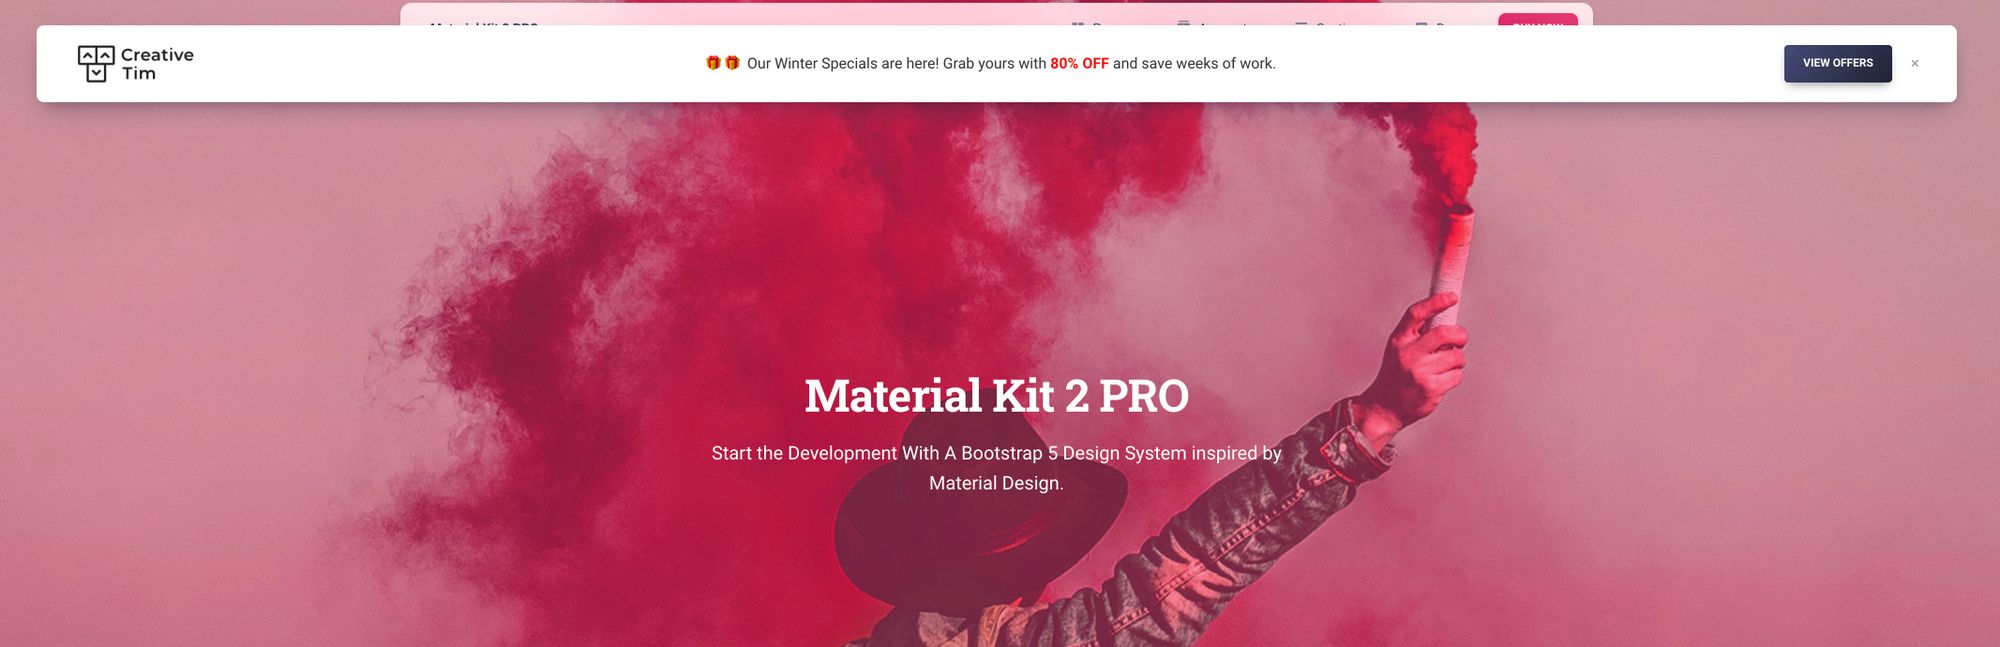 material kit 2 pro by creative tim